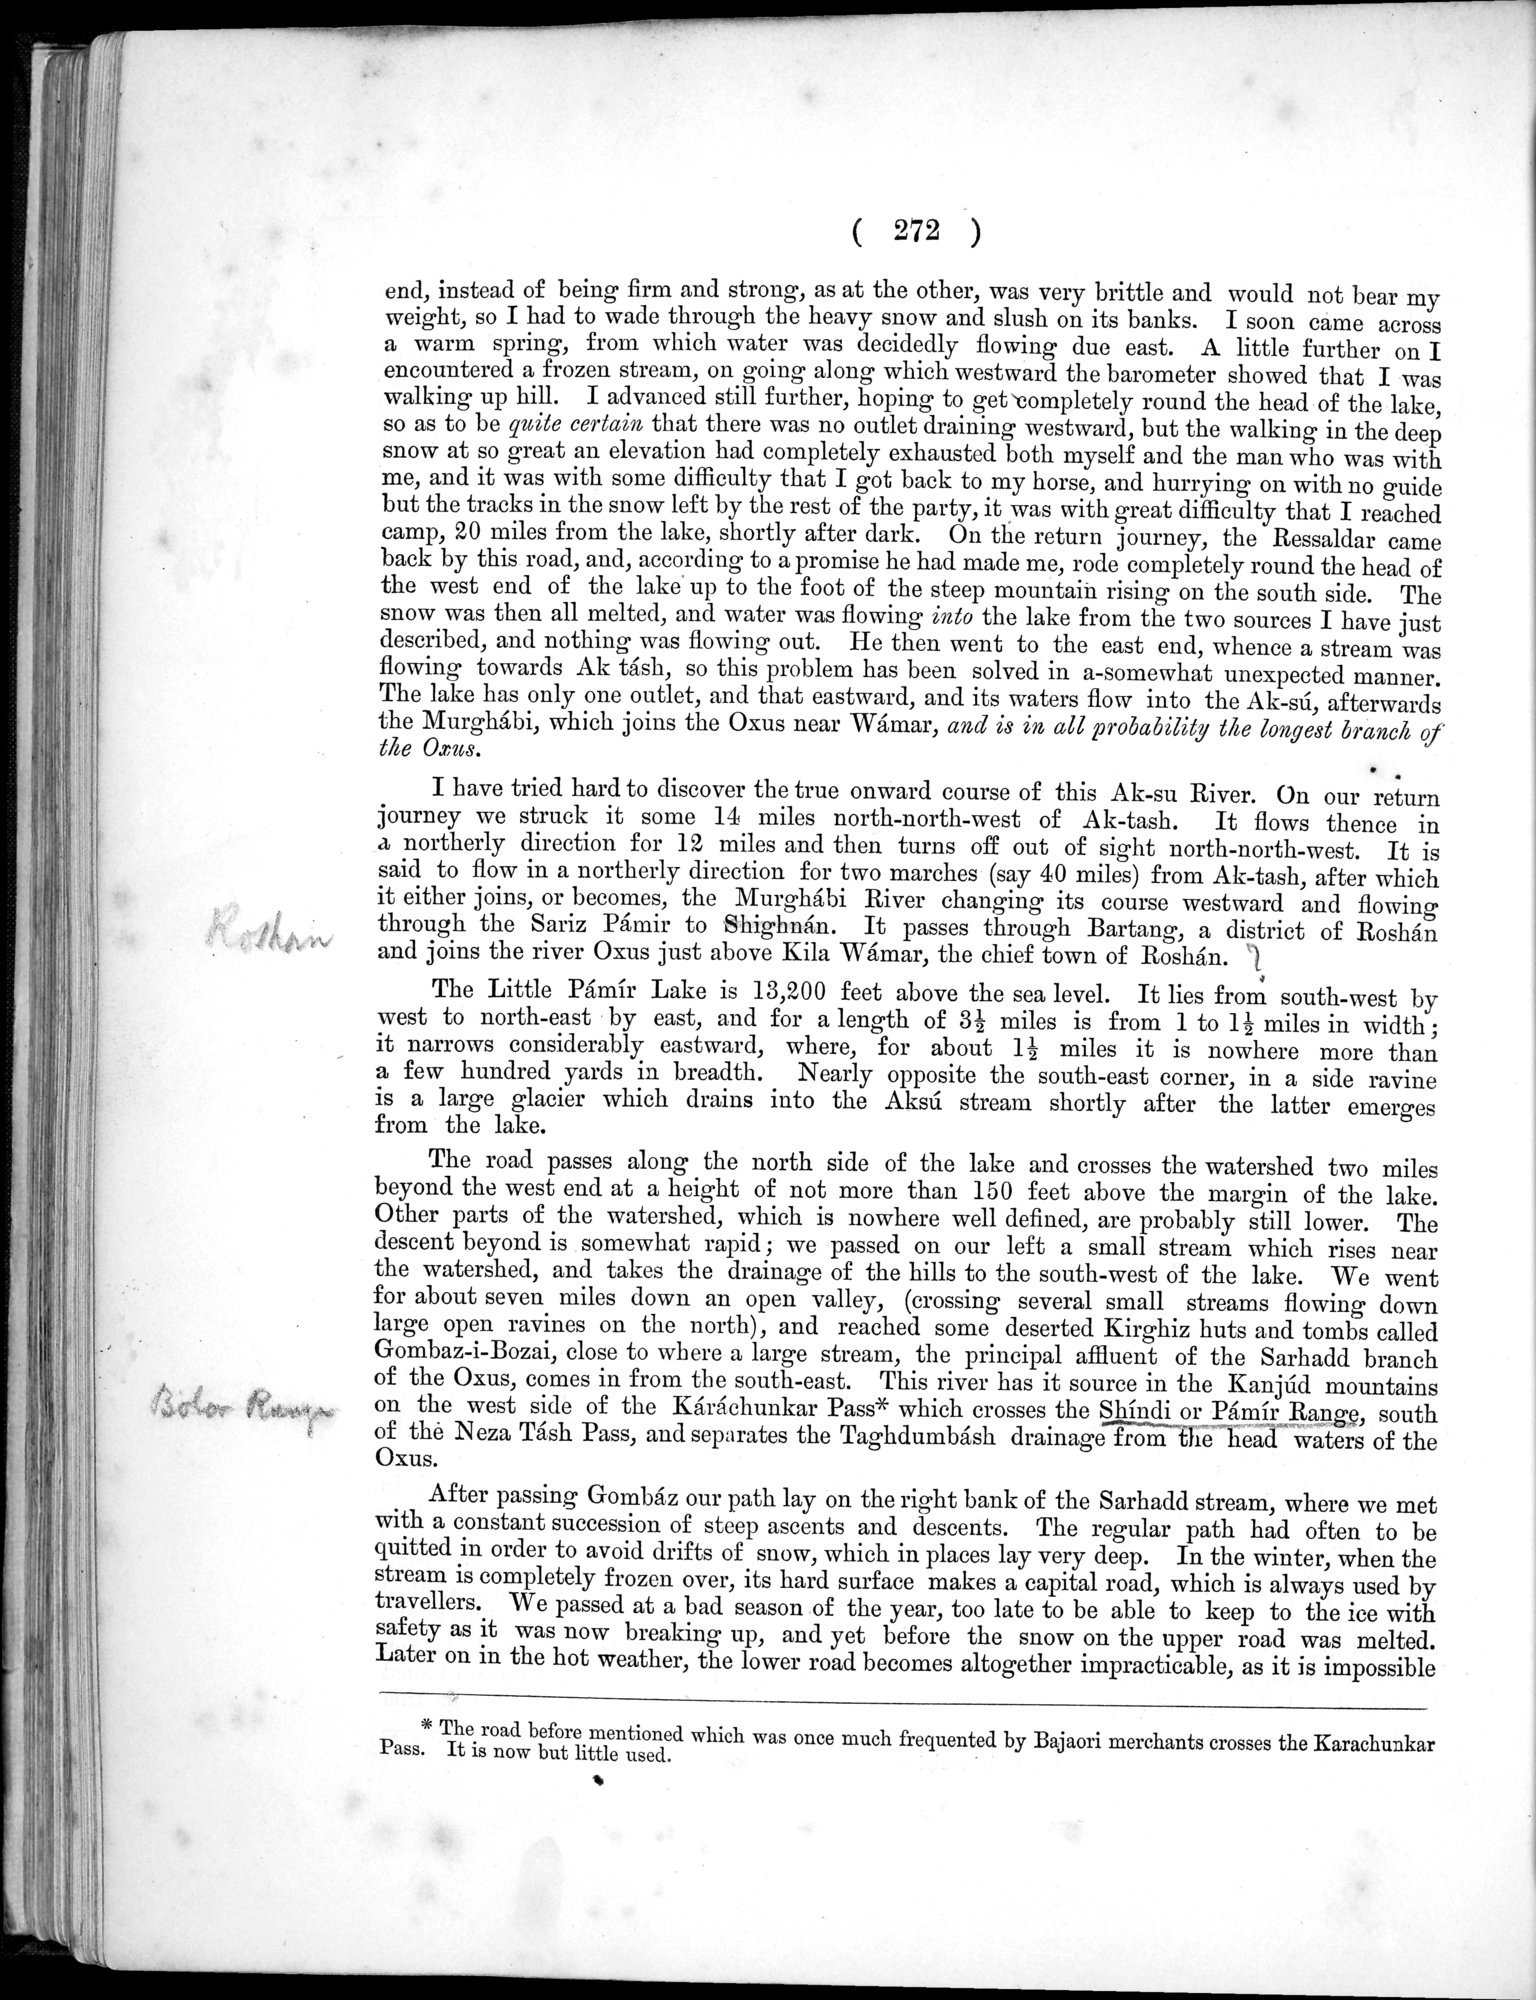 Report of a Mission to Yarkund in 1873 : vol.1 / Page 390 (Grayscale High Resolution Image)